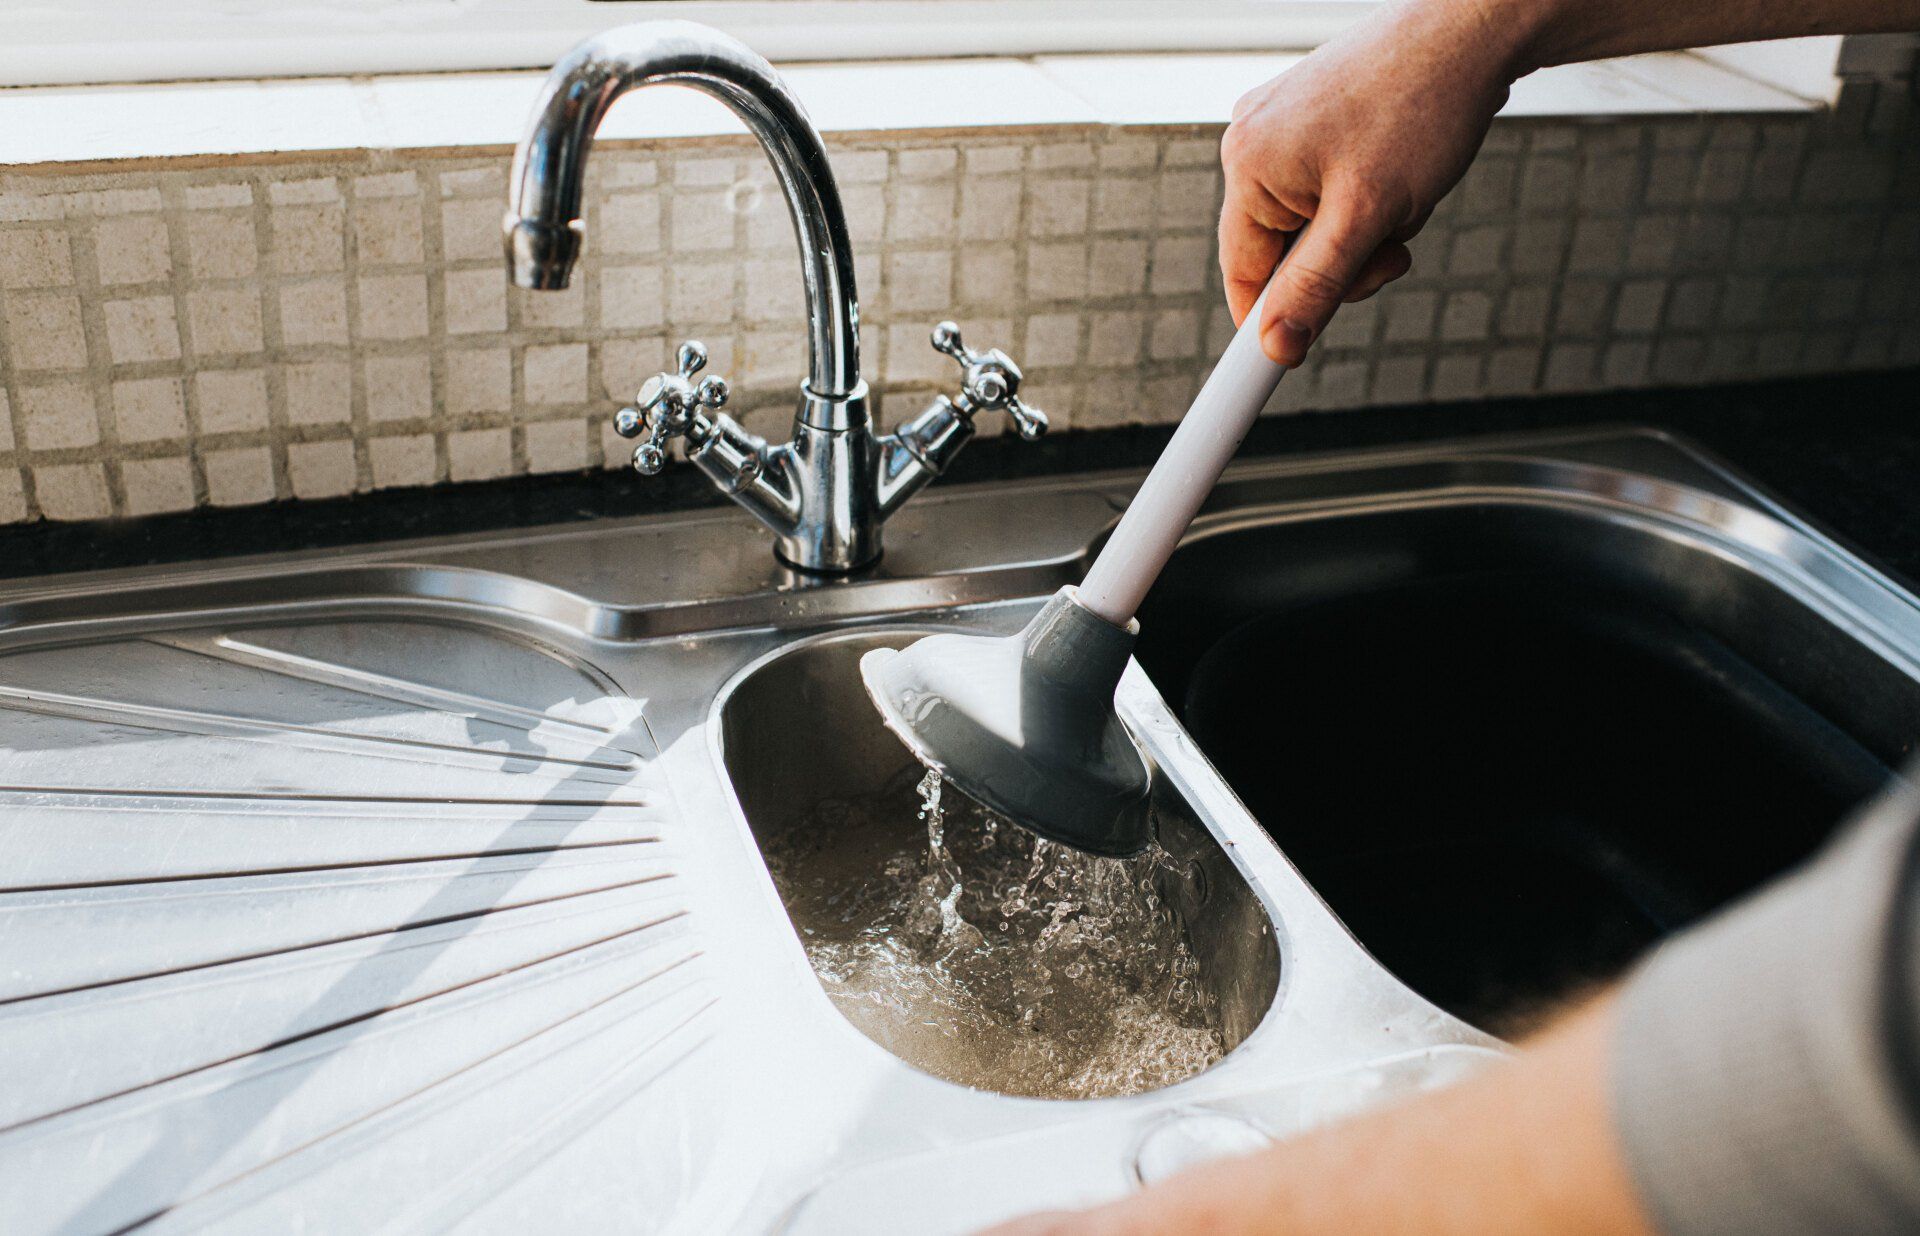 Plunging A Sink | Columbus, OH | Discount Plumbing and Drains Solutions LLC